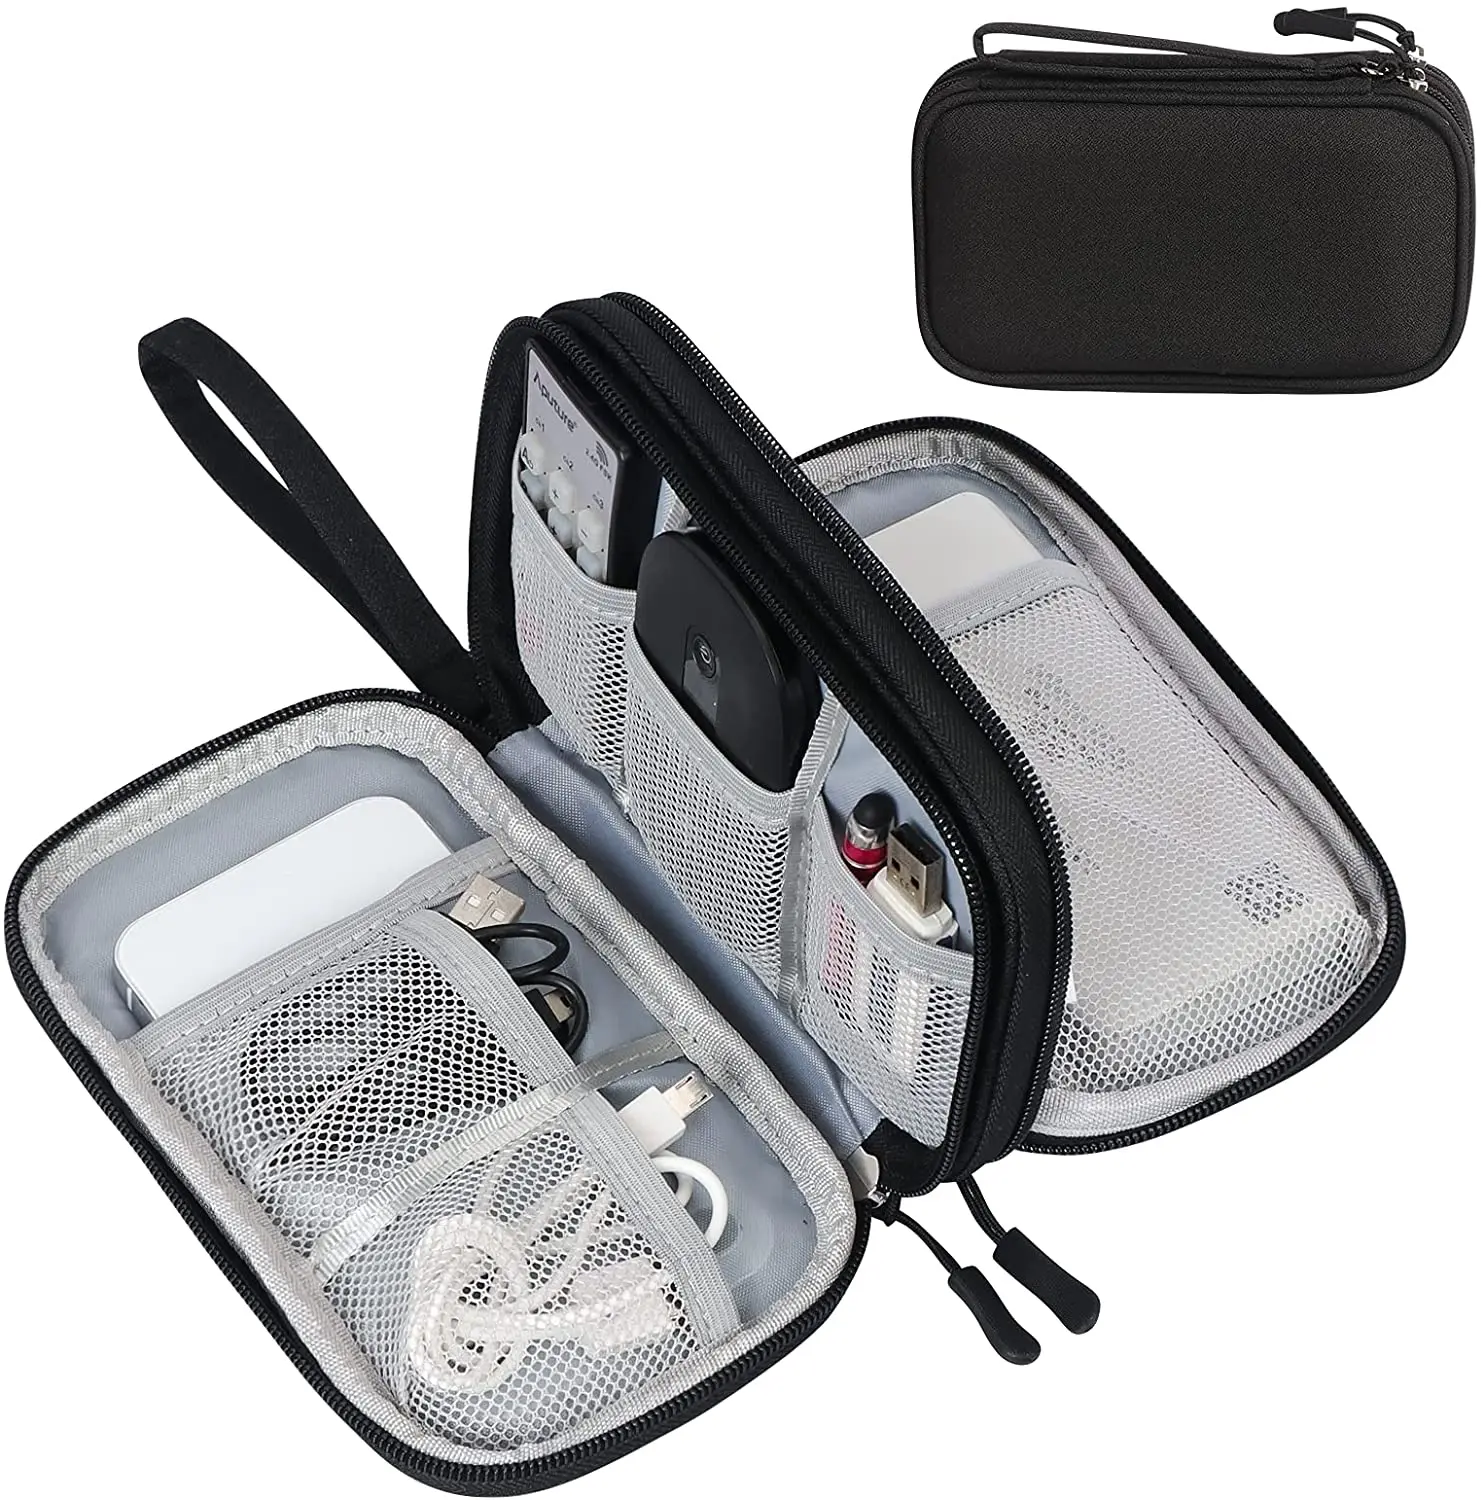 

FYY Electronic Organizer, Travel Cable Organizer Bag Pouch Electronic Accessories Carry Case Portable Waterproof Double Layers